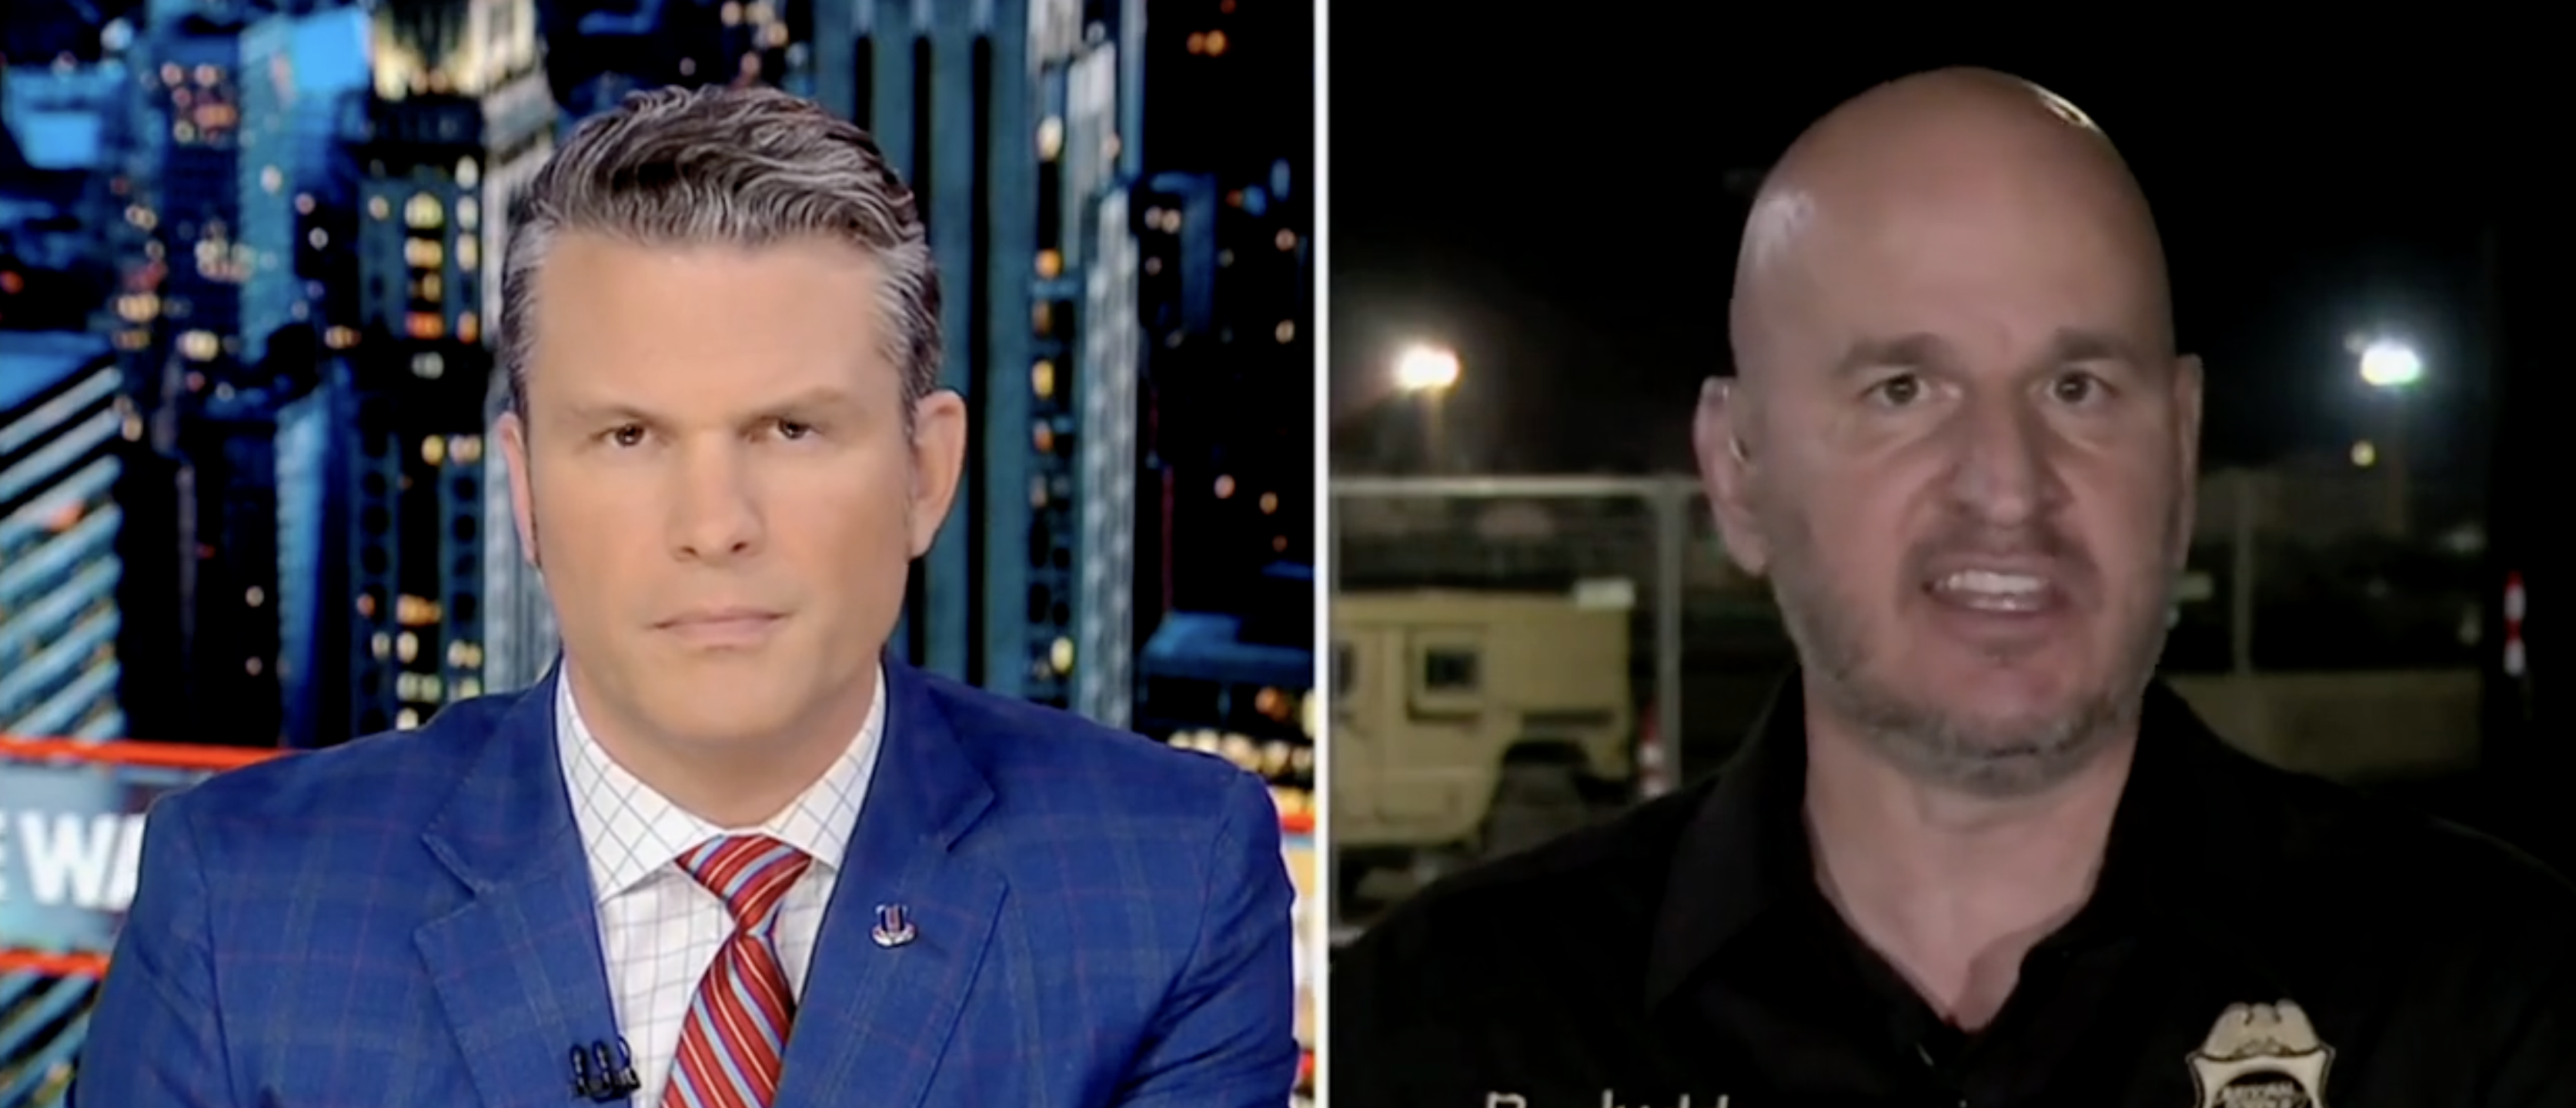 Border Patrol Council Pres Brandon Judd Rips Into Biden Officials, Says Migrants Know They Won’t Be ‘Held Accountable’